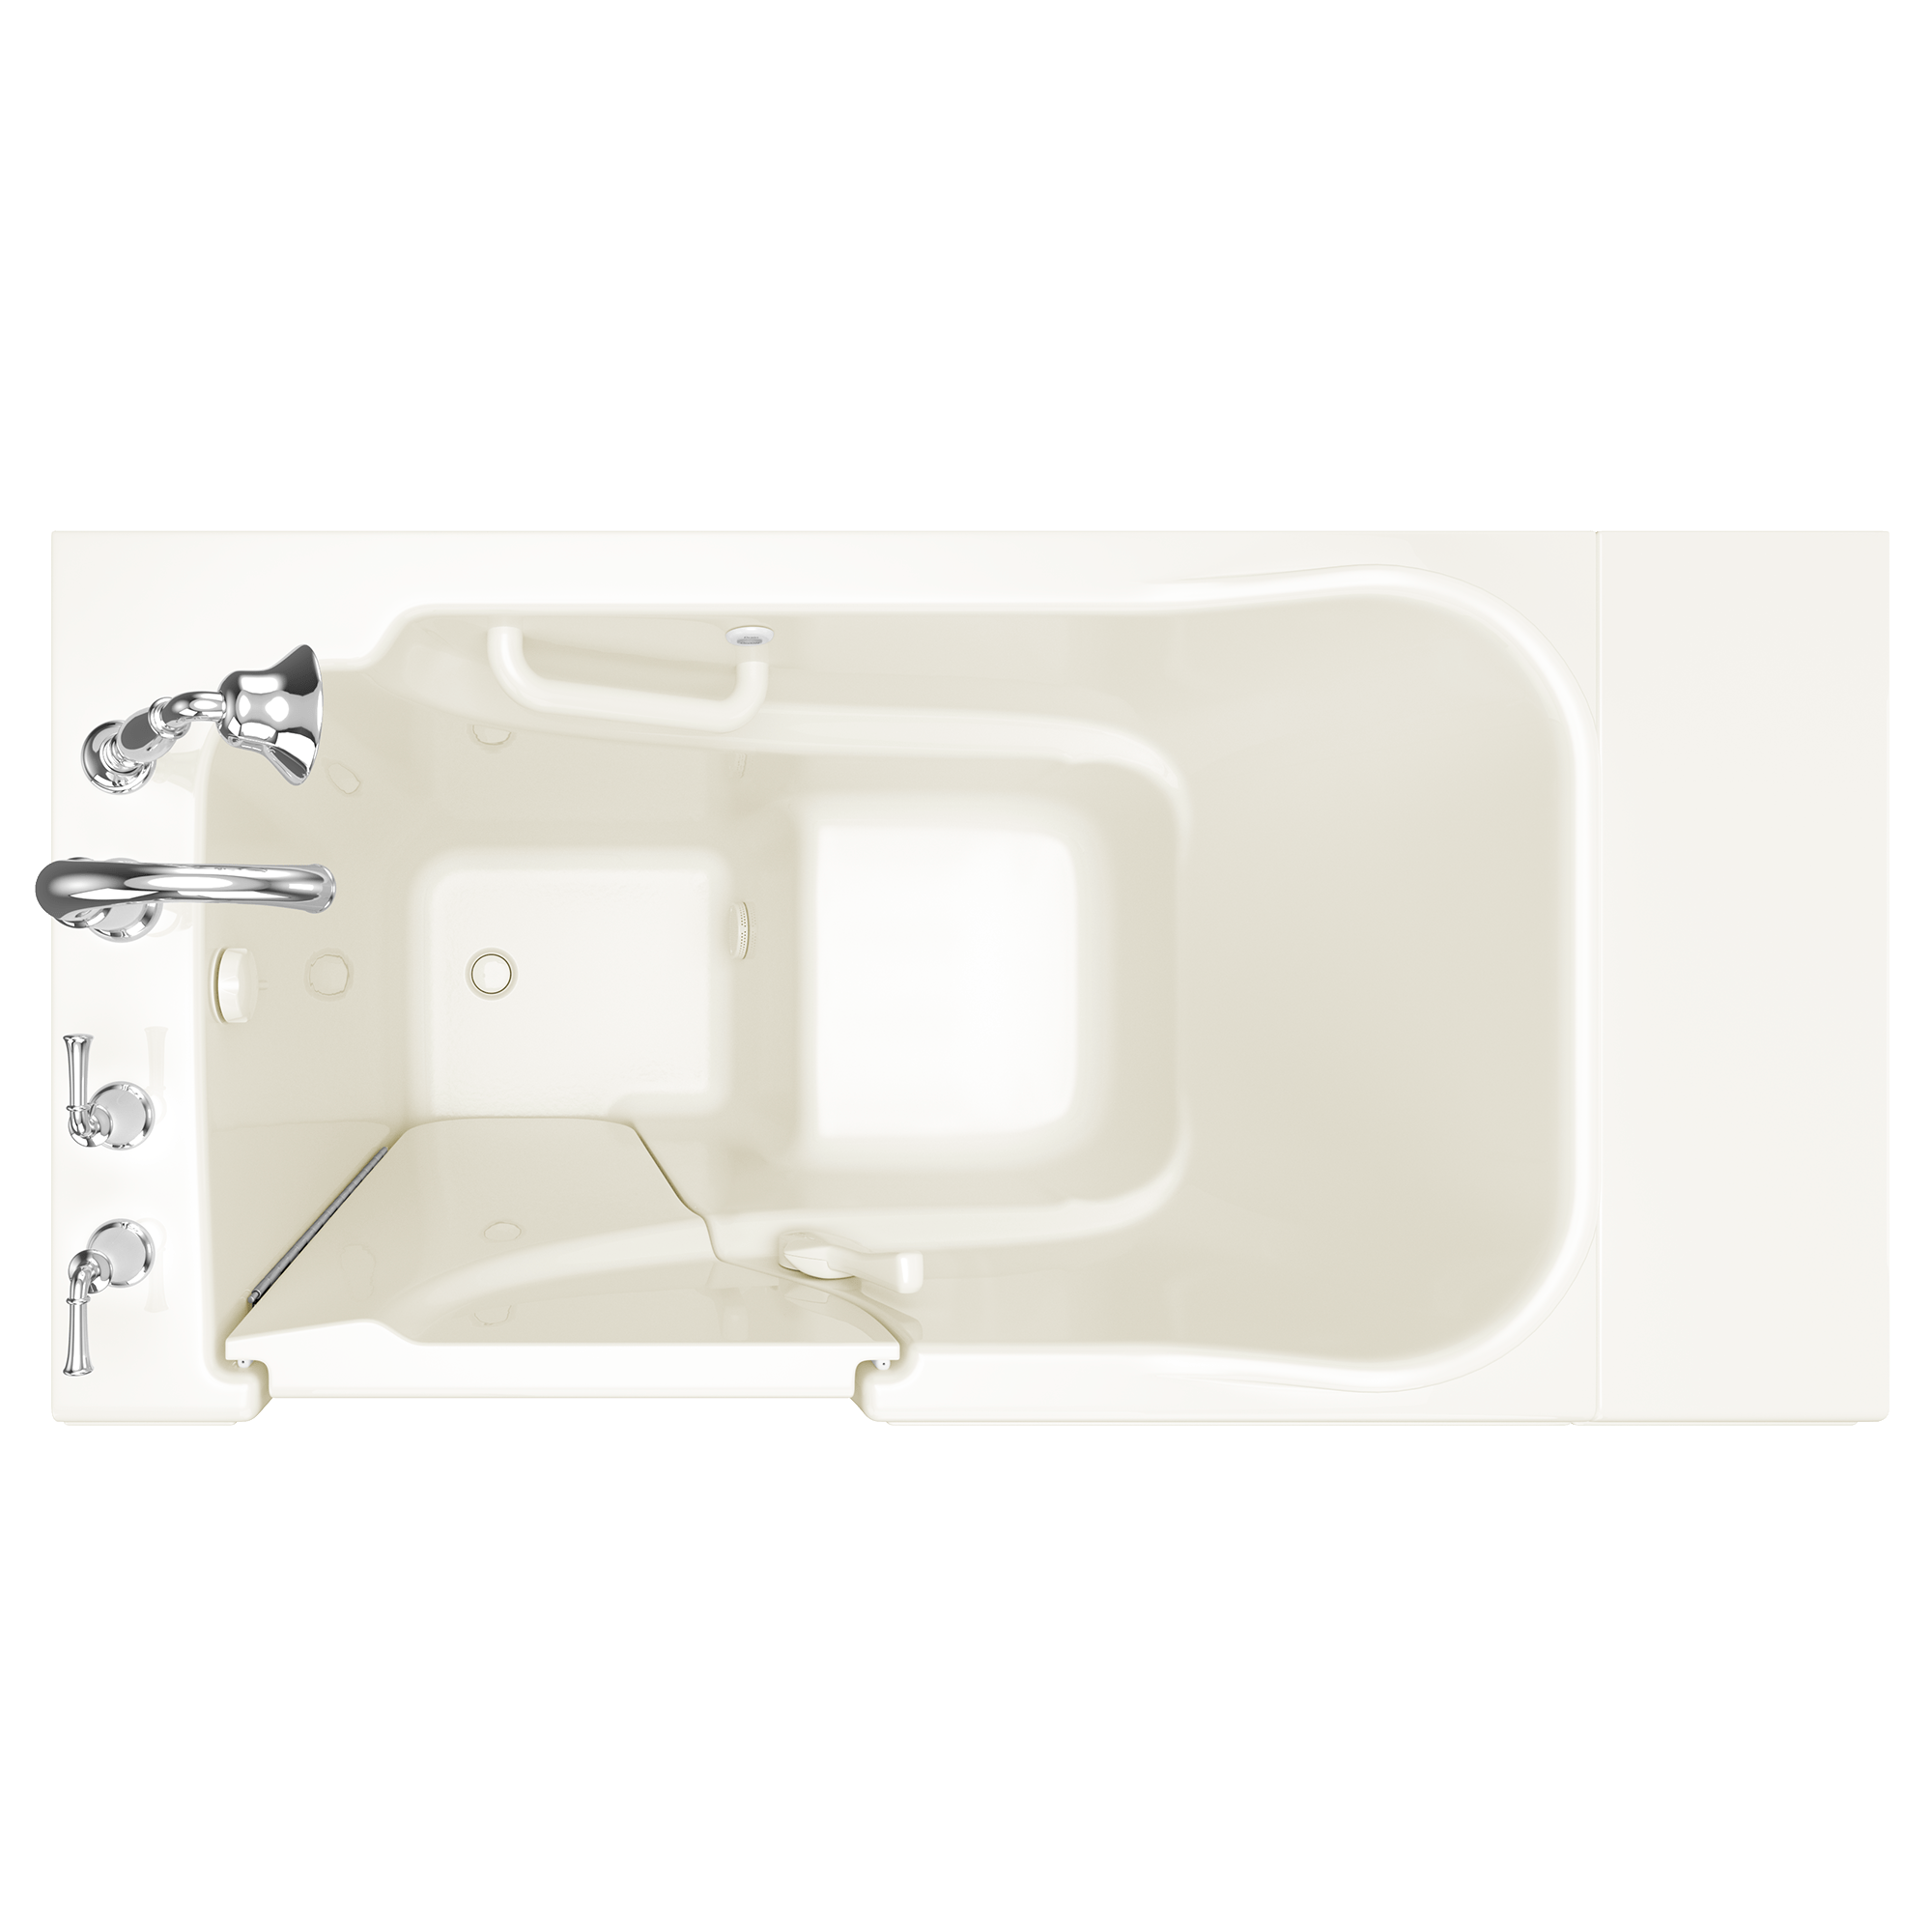 Gelcoat Value Series 30 x 52  Inch Walk in Tub With Soaker System   Left Hand Drain With Faucet WIB LINEN